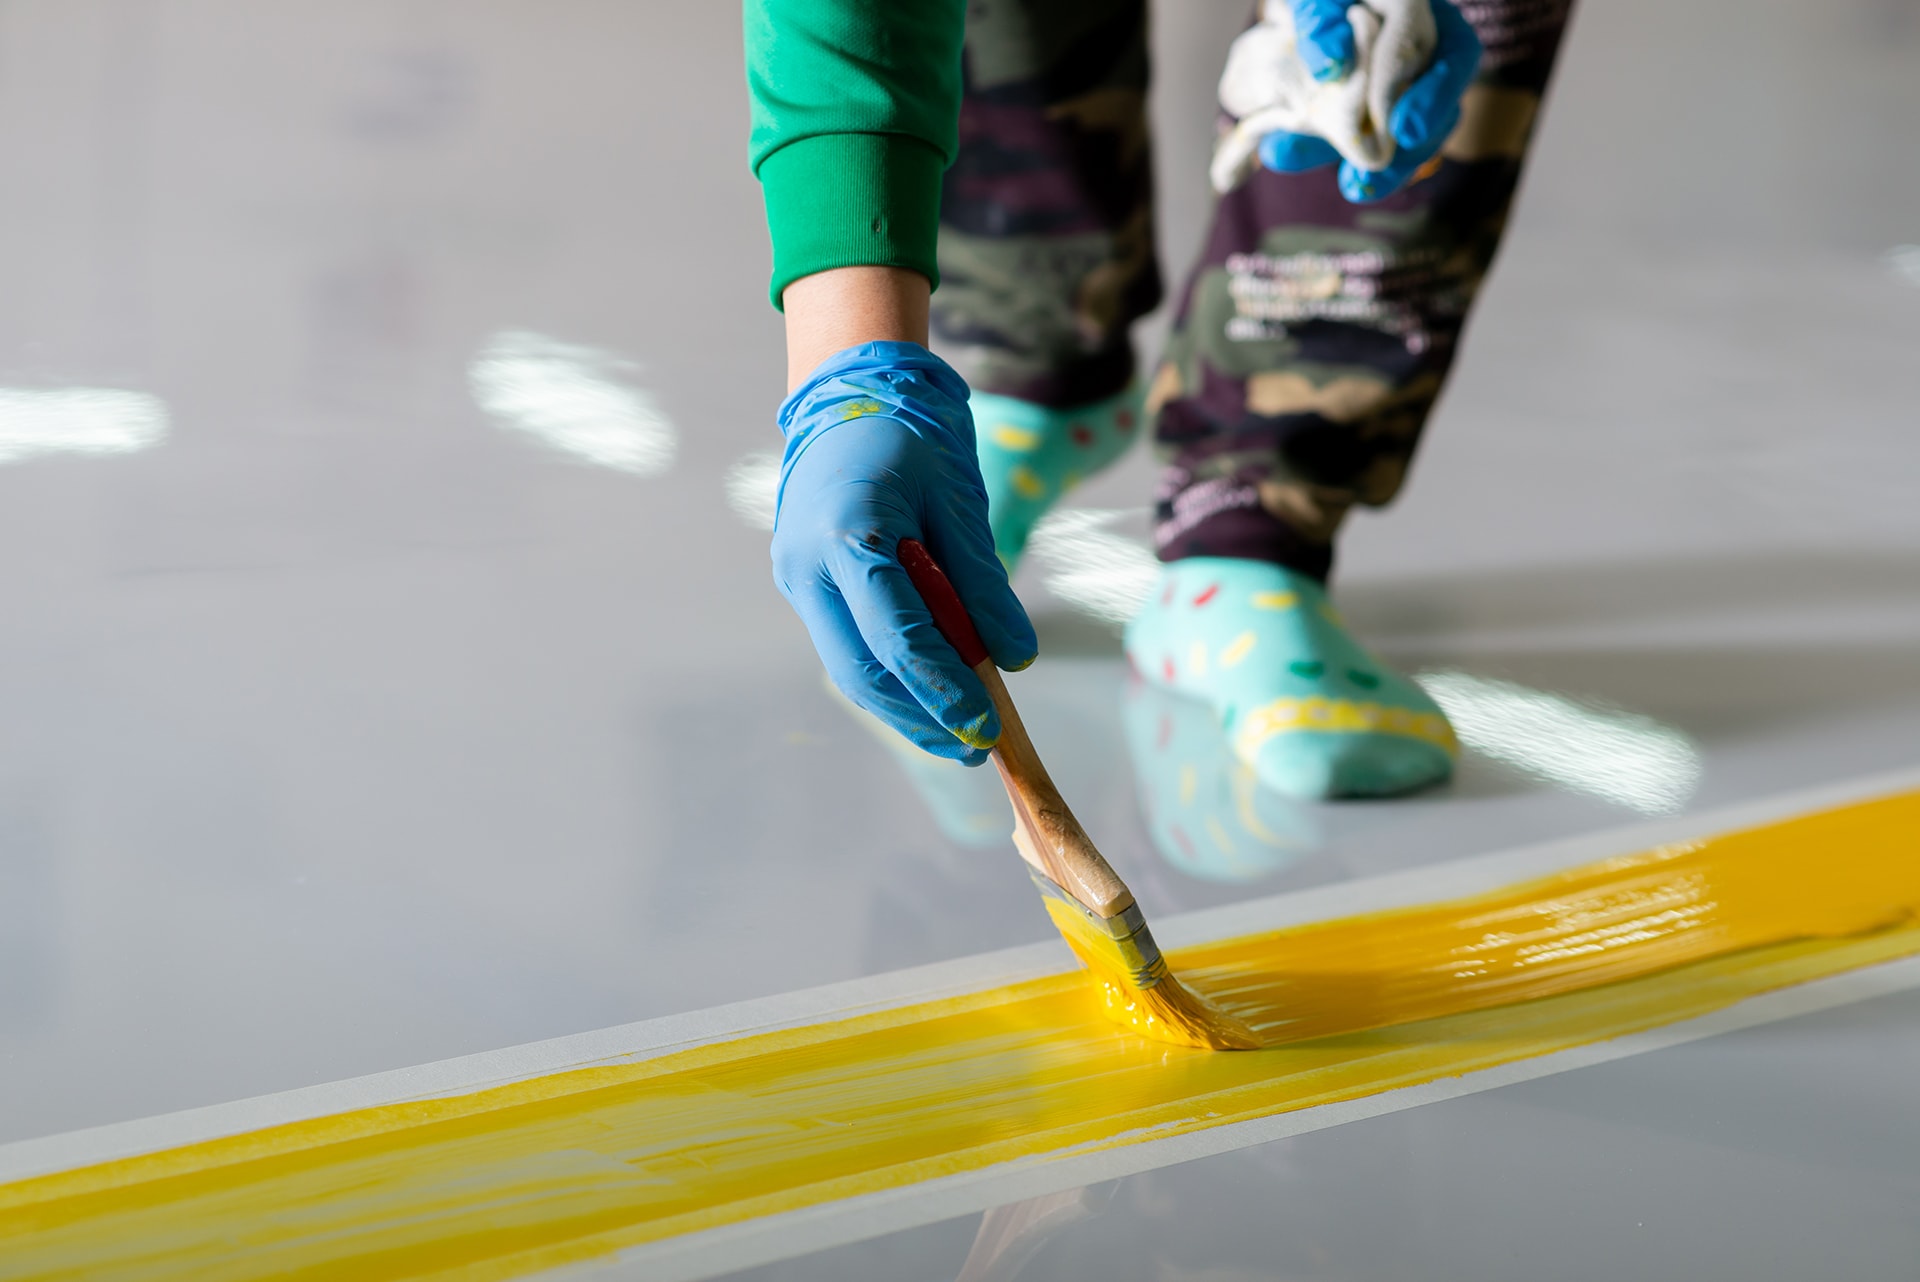 The optimum blend at all times: Pan milling for paints and floor coatings.